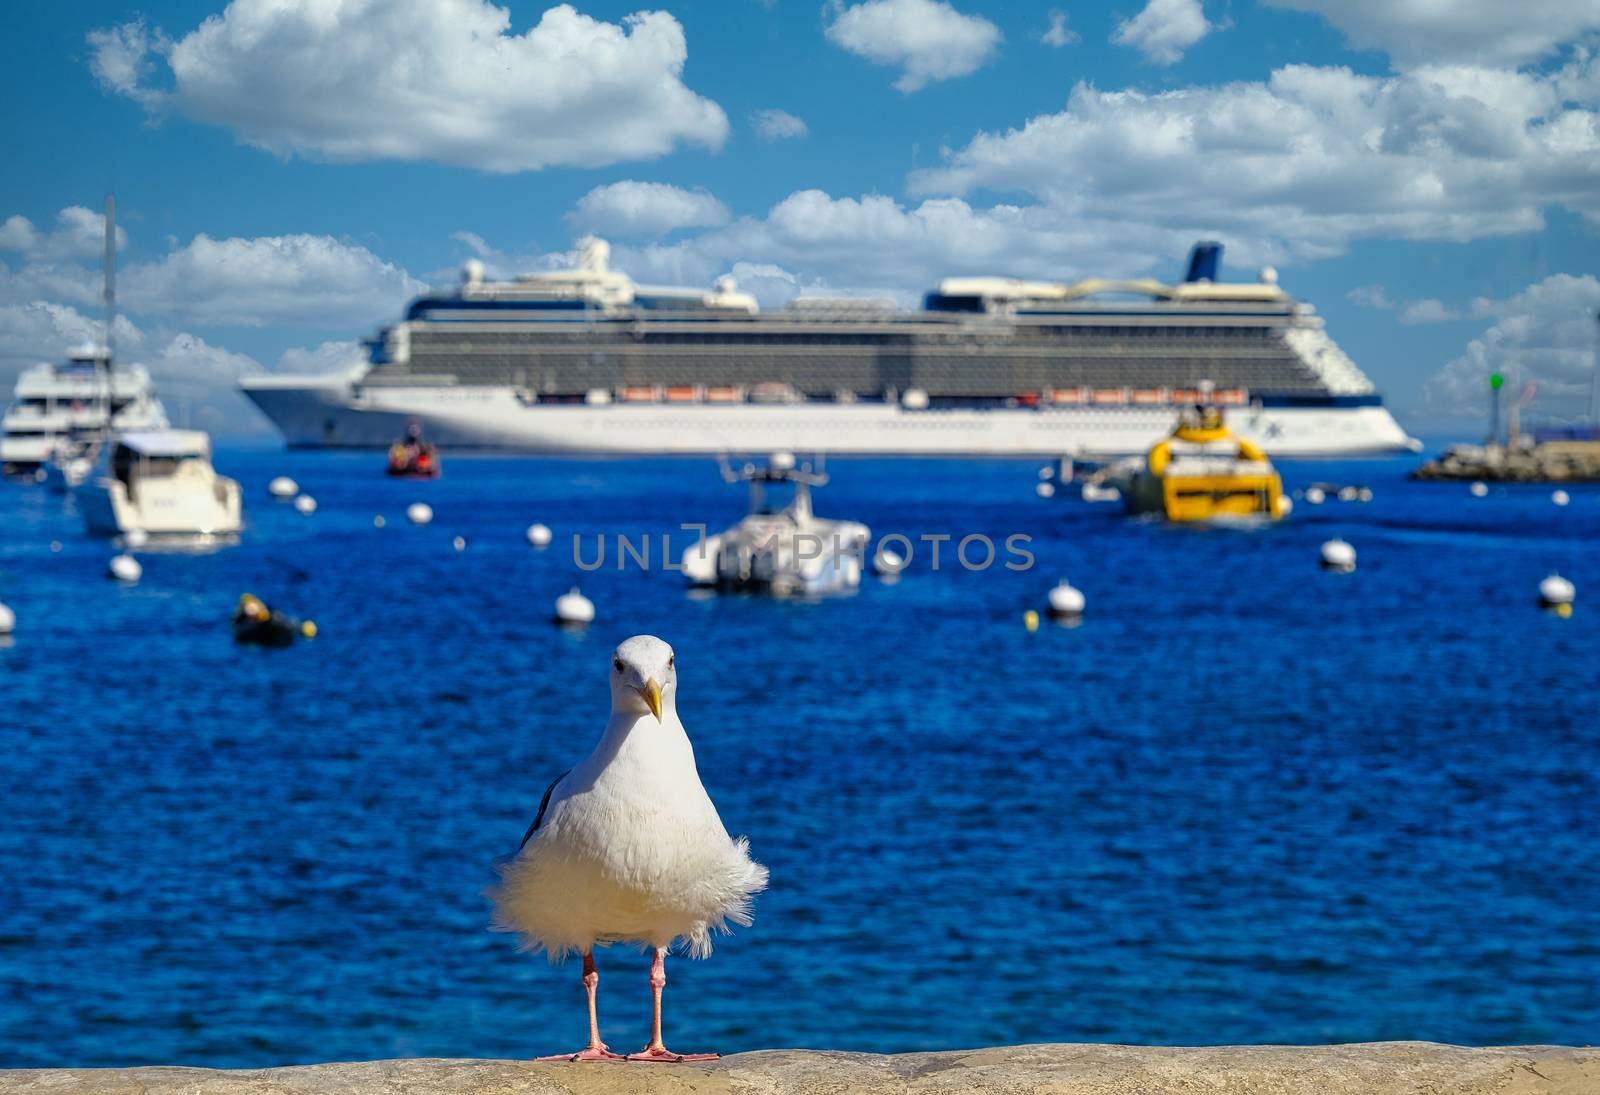 Seagull with Cruise Ship and Harbor in Backgroun